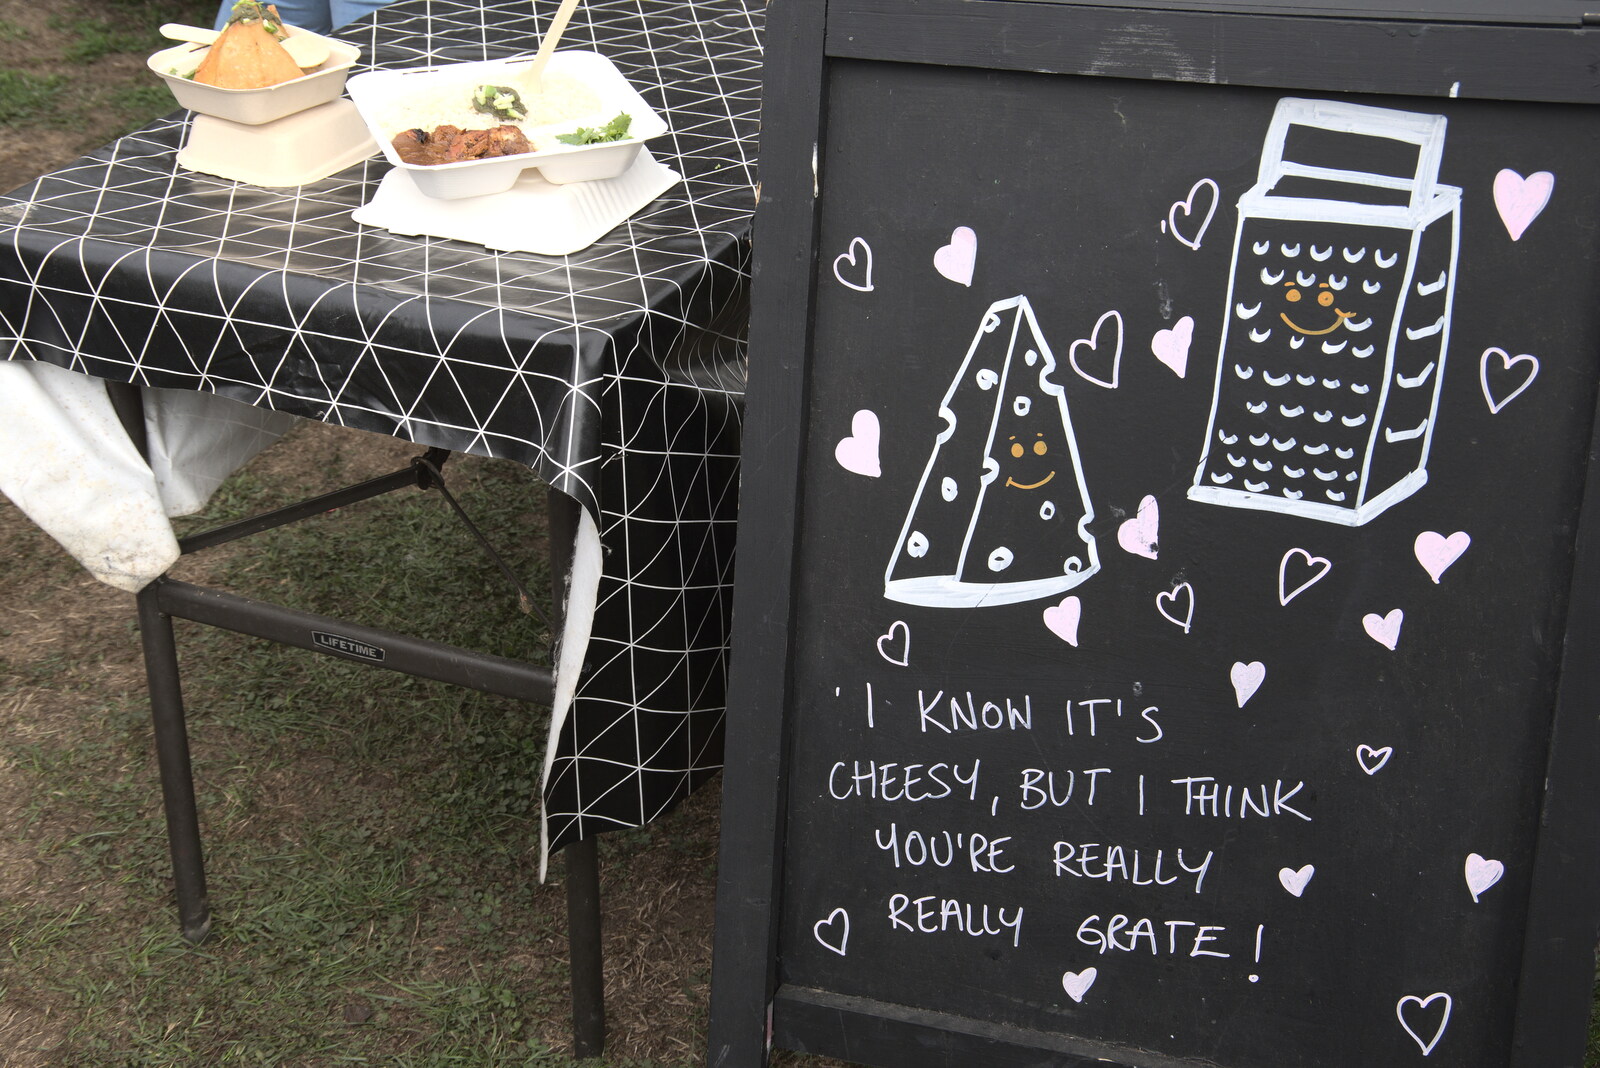 An amusing, if cheesy, sign from The Aldeburgh Food Festival, Snape Maltings, Suffolk - 25th September 2022